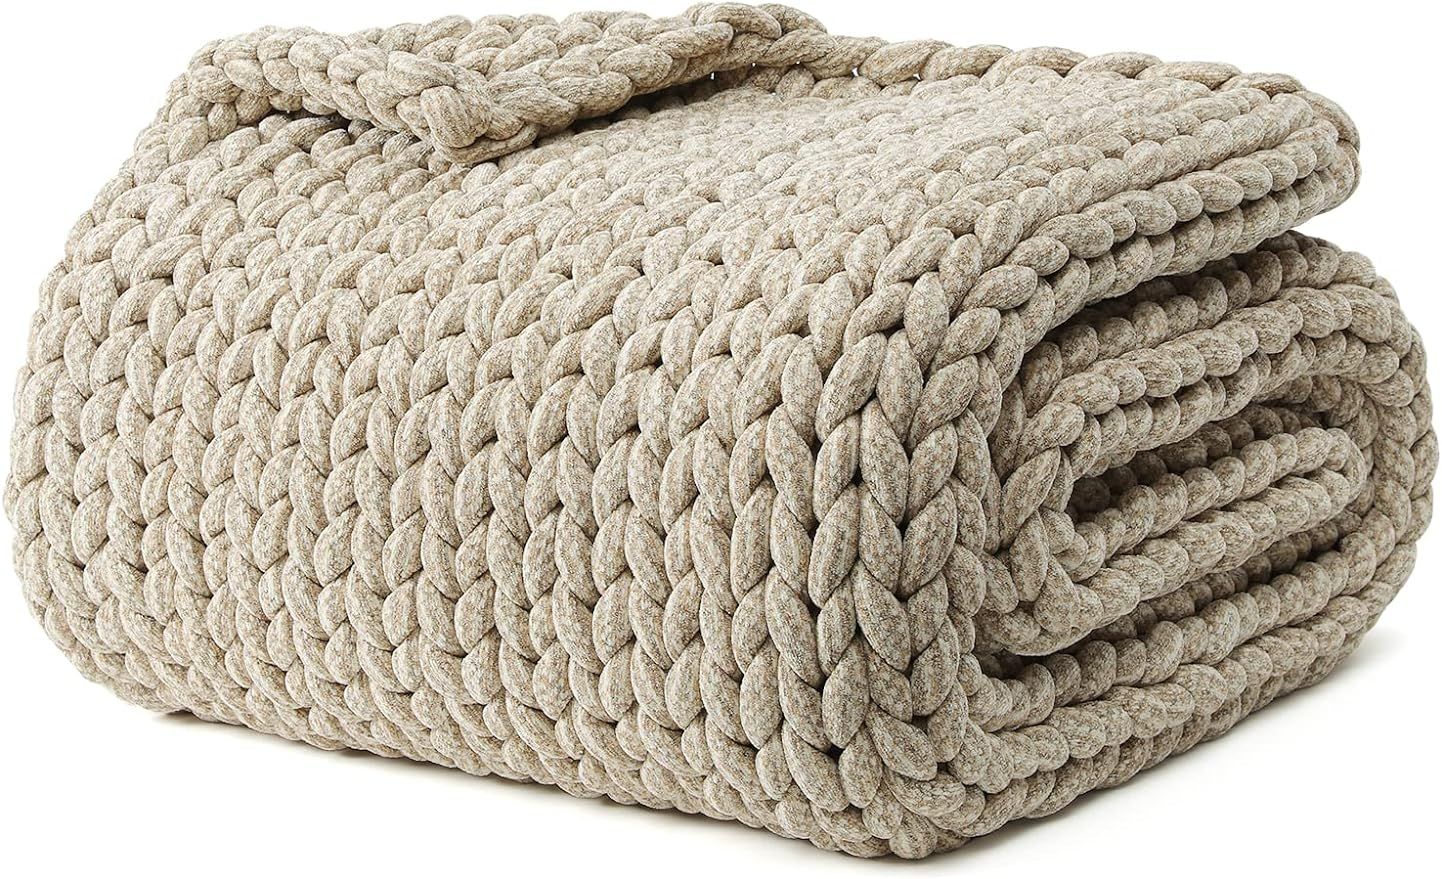 YnM Chenille Weighted Blanket, Handmade Chunky Knitted Design, Soft and Cozy, Temperature Regulating and Breathable, Machine Washable Throw for Sleep or Home Decor (Beige, 60x80 Inch, 15lbs) | Amazon (US)